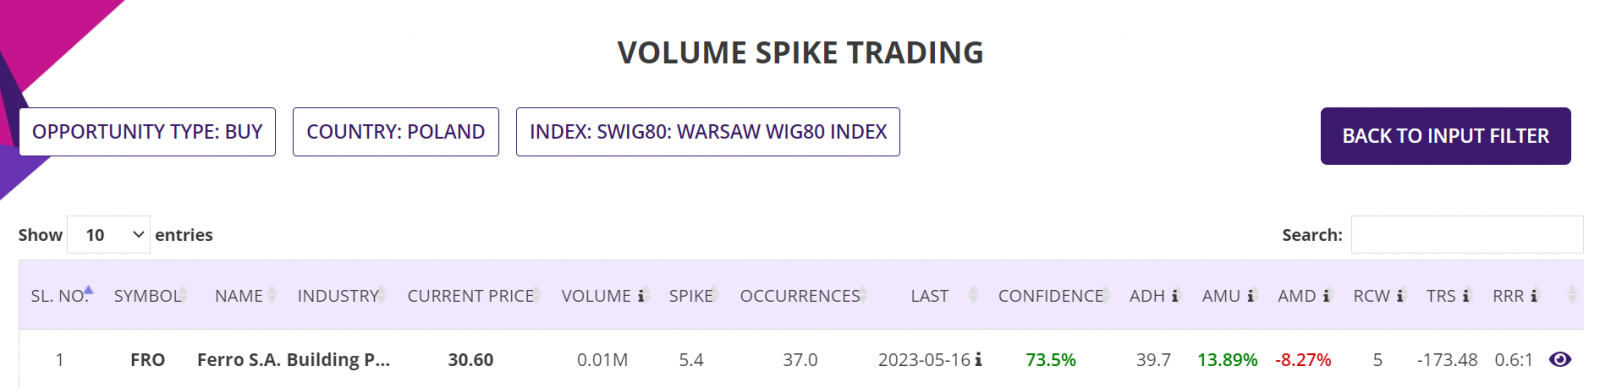 Volume spike trading strategy, summary report, Poland WIG80 Index